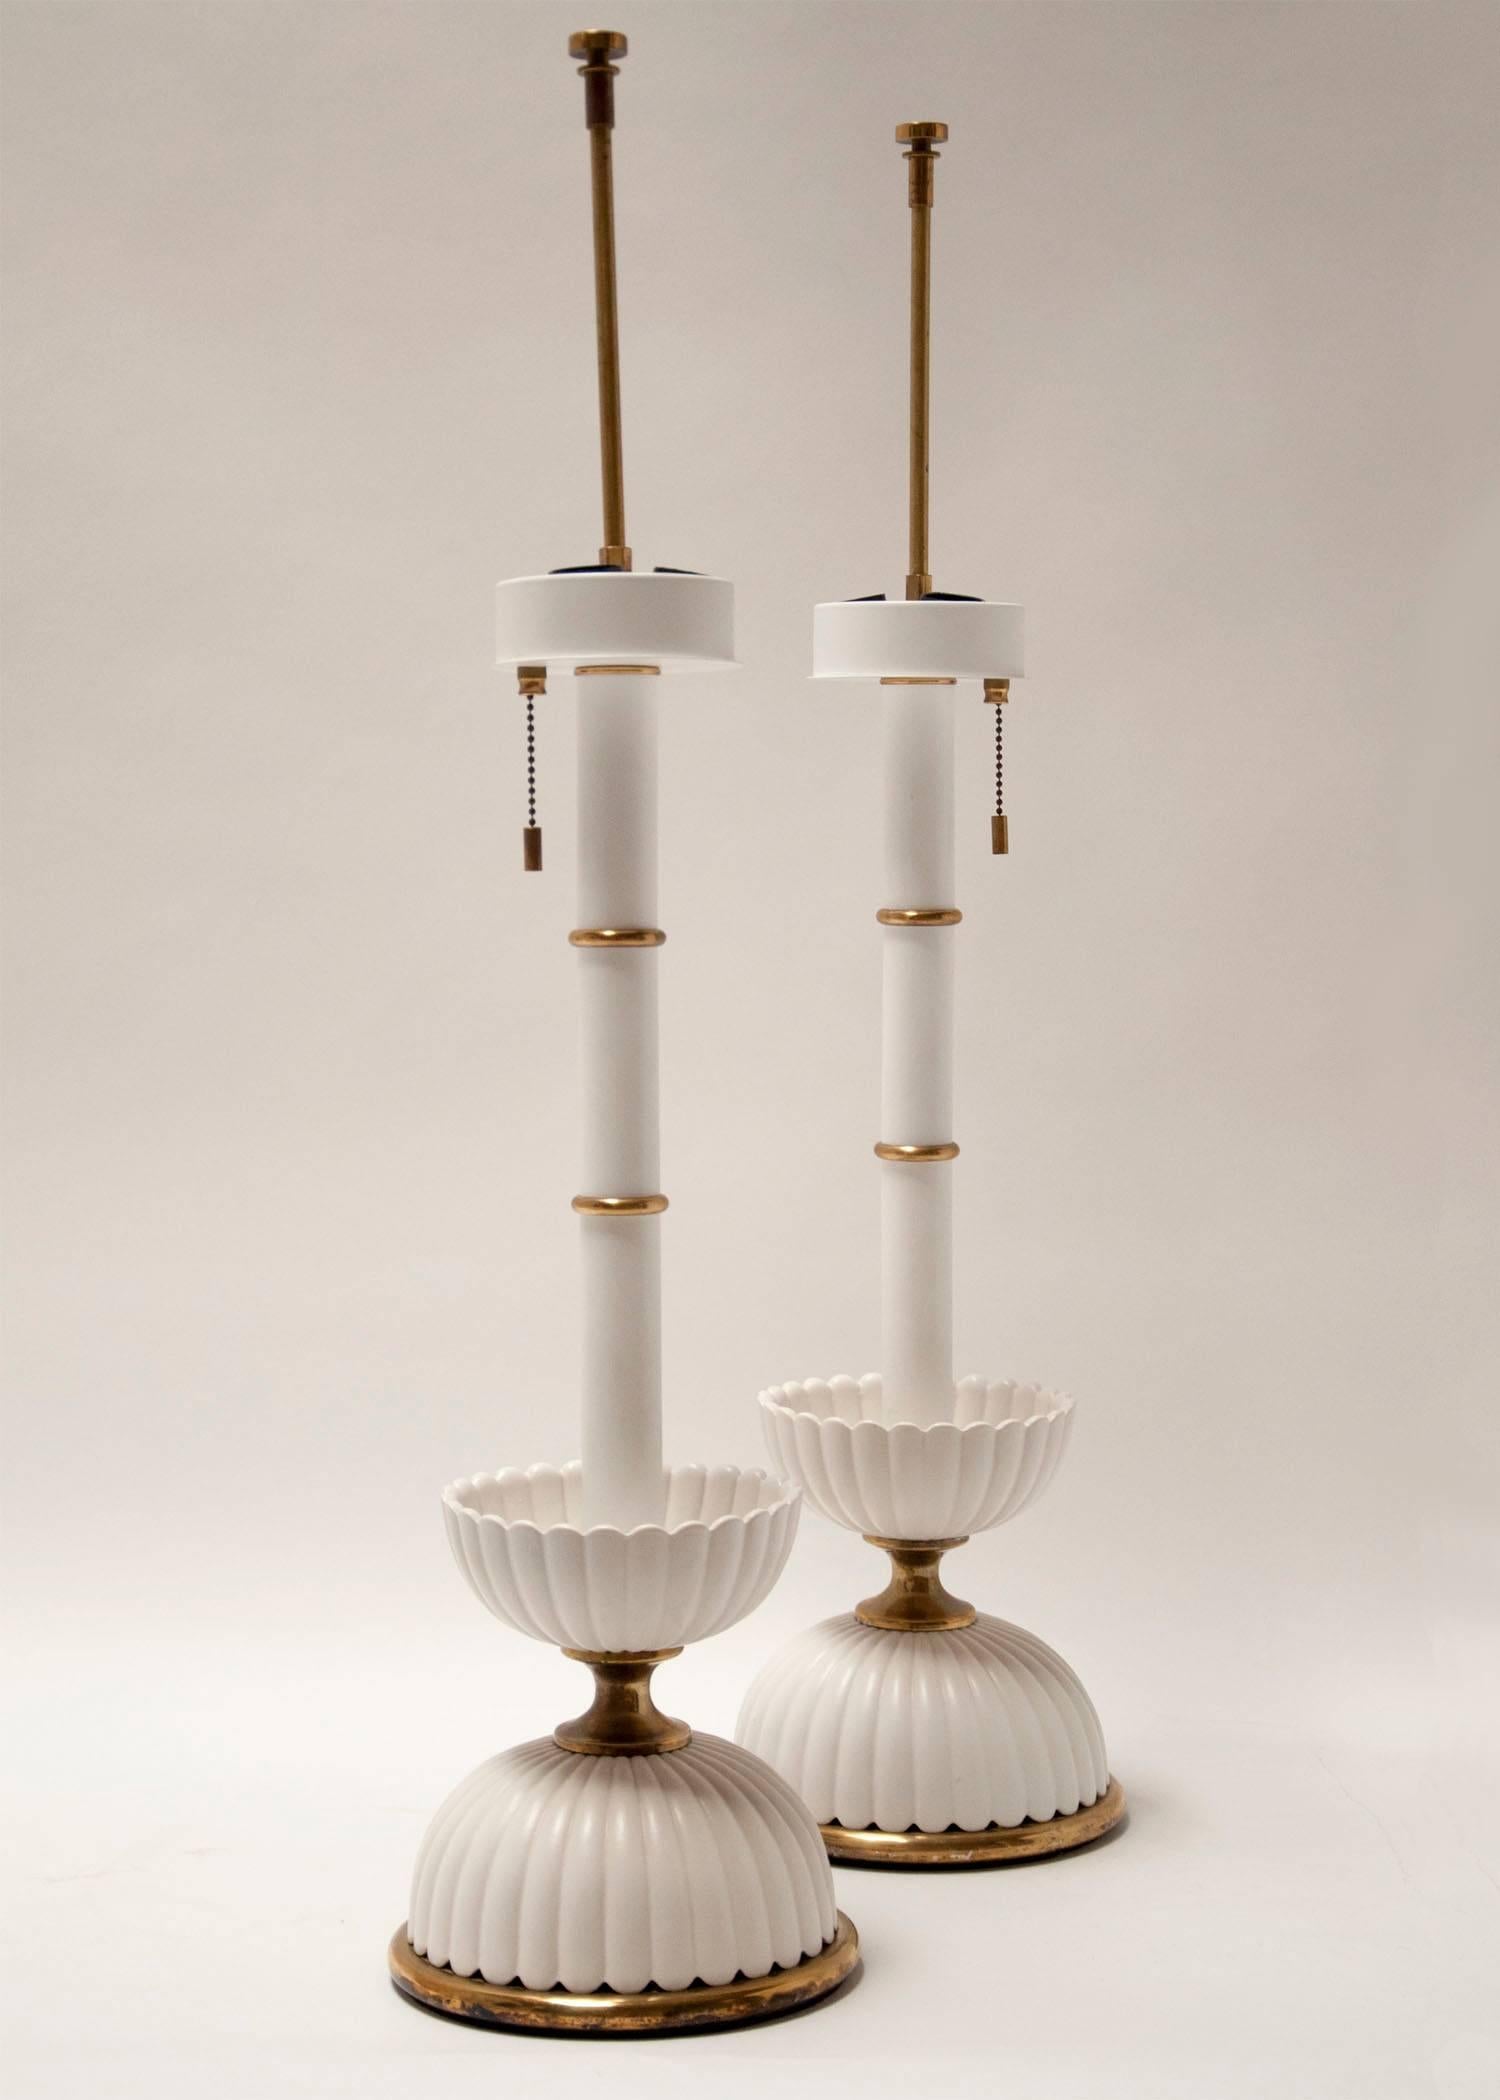 Pair of Lightolier lamps attributed to Gerald Thurston, circa 1950s. Matt white ceramic with brass accents. Beautiful condition with no cracks or chips to the ceramic parts. Mid-Century Modern and Hollywood Regency style.
23.5